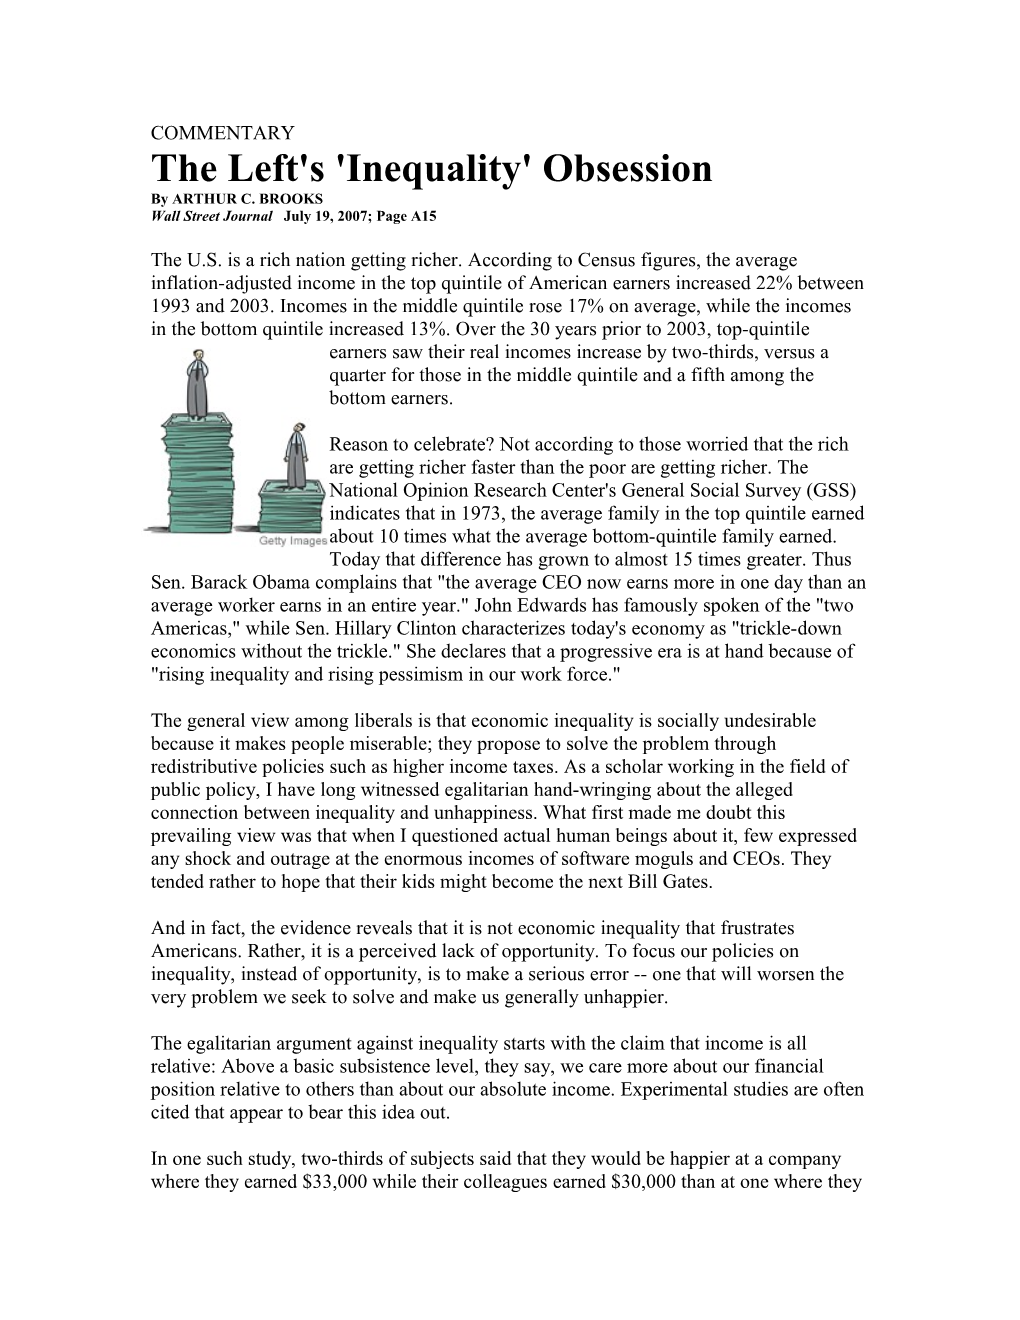 The Left's 'Inequality' Obsession